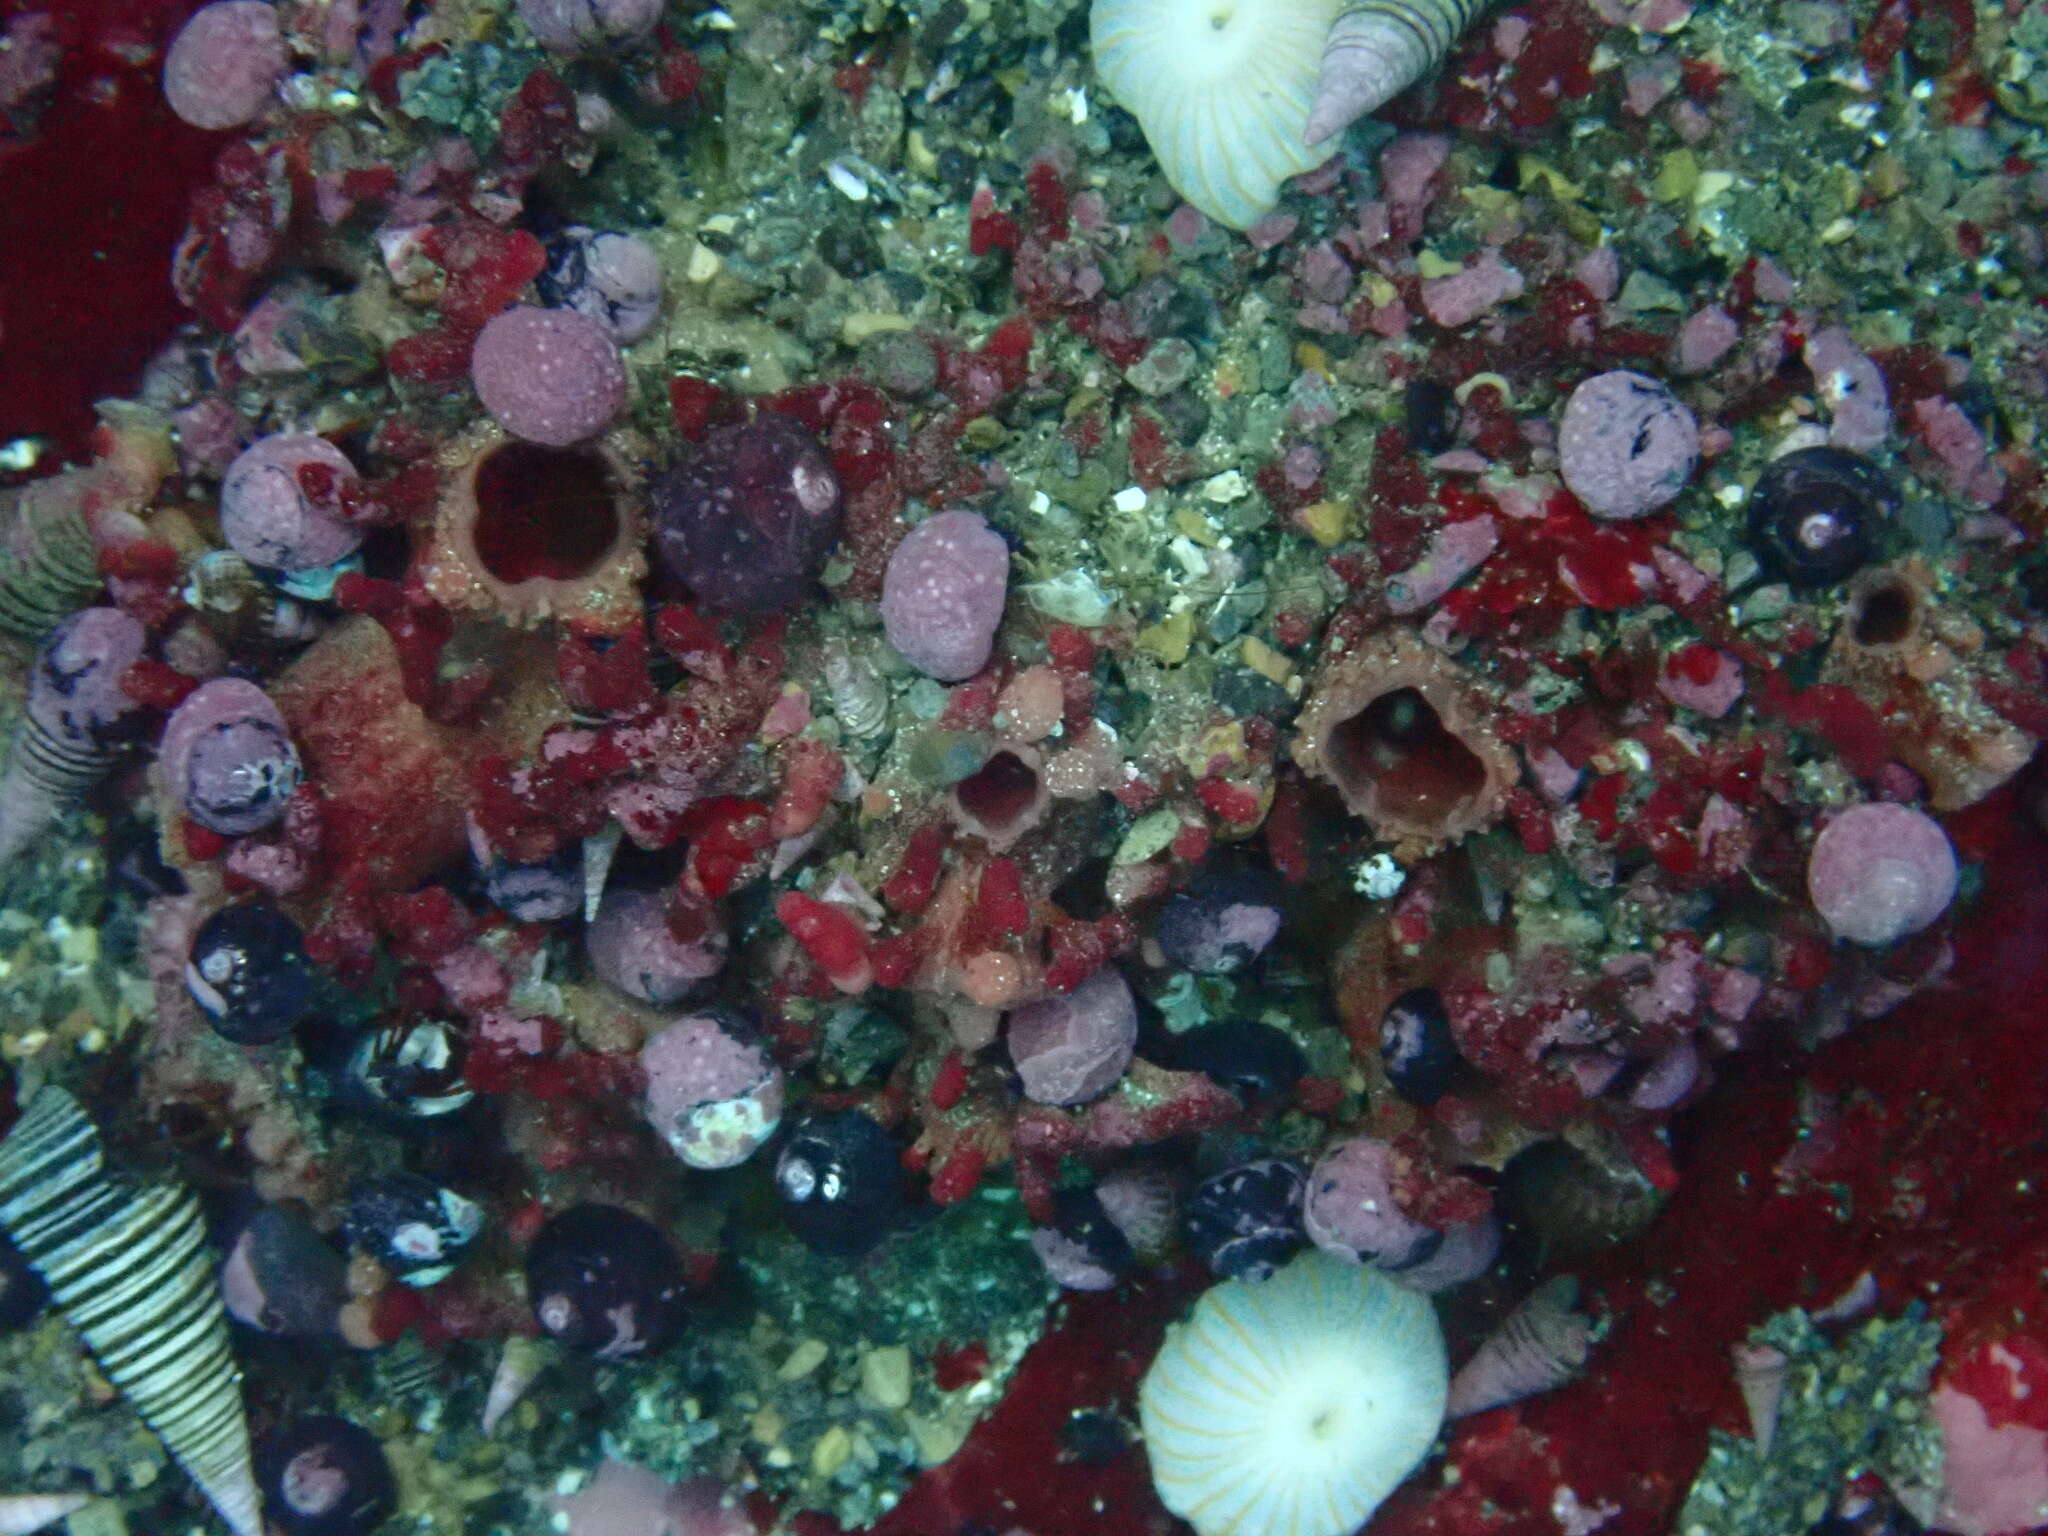 Image of red sea squirt